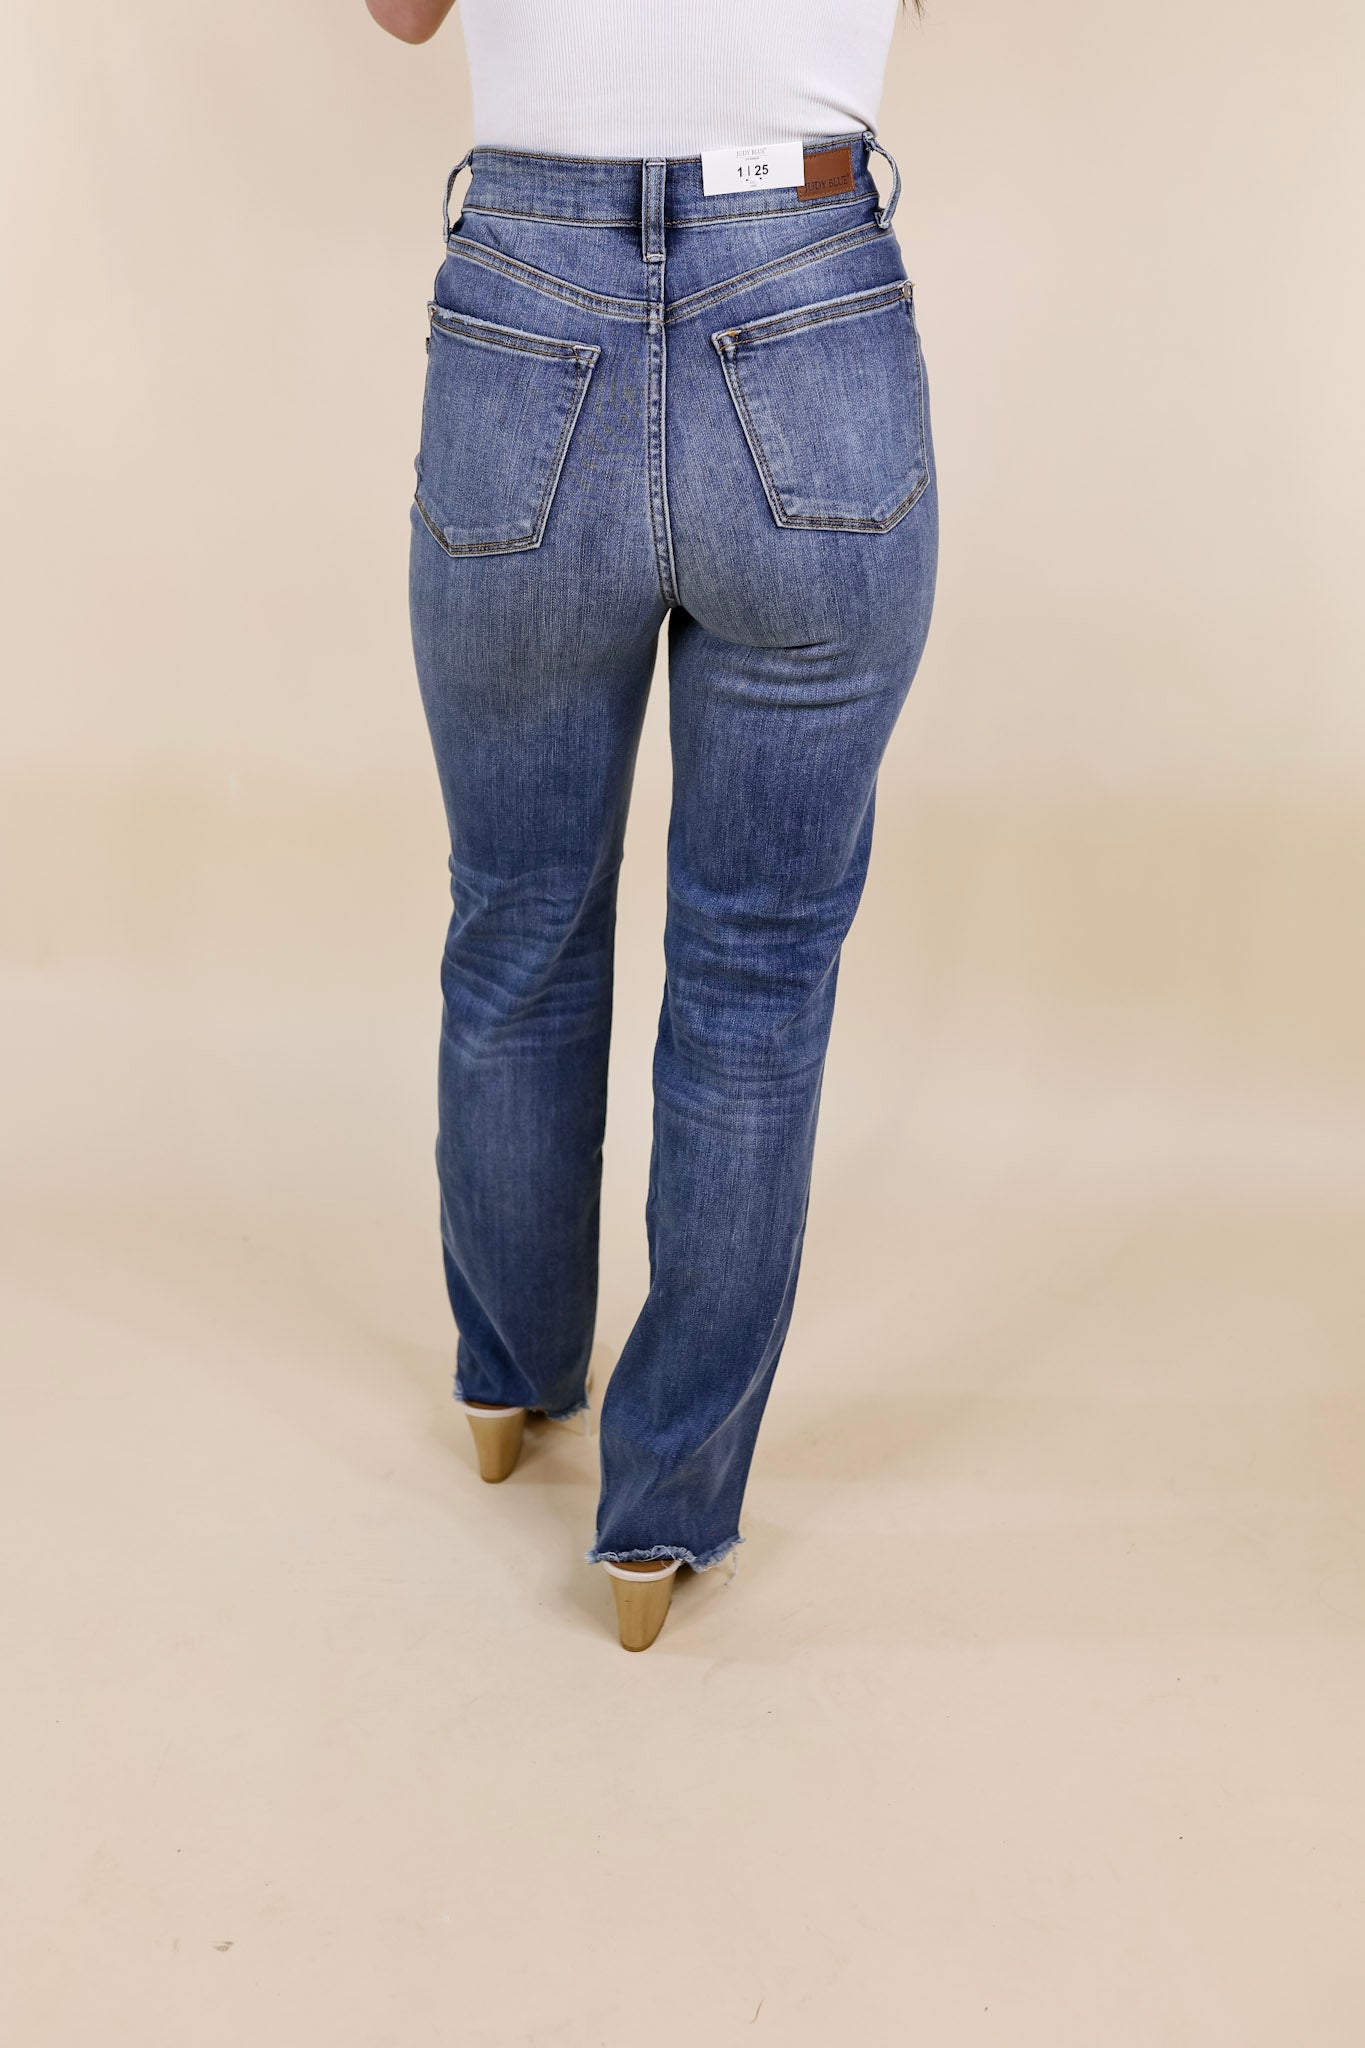 Judy Blue | Sure And Steady Criss-Cross Waistband Dad Jeans in Medium Wash - Giddy Up Glamour Boutique